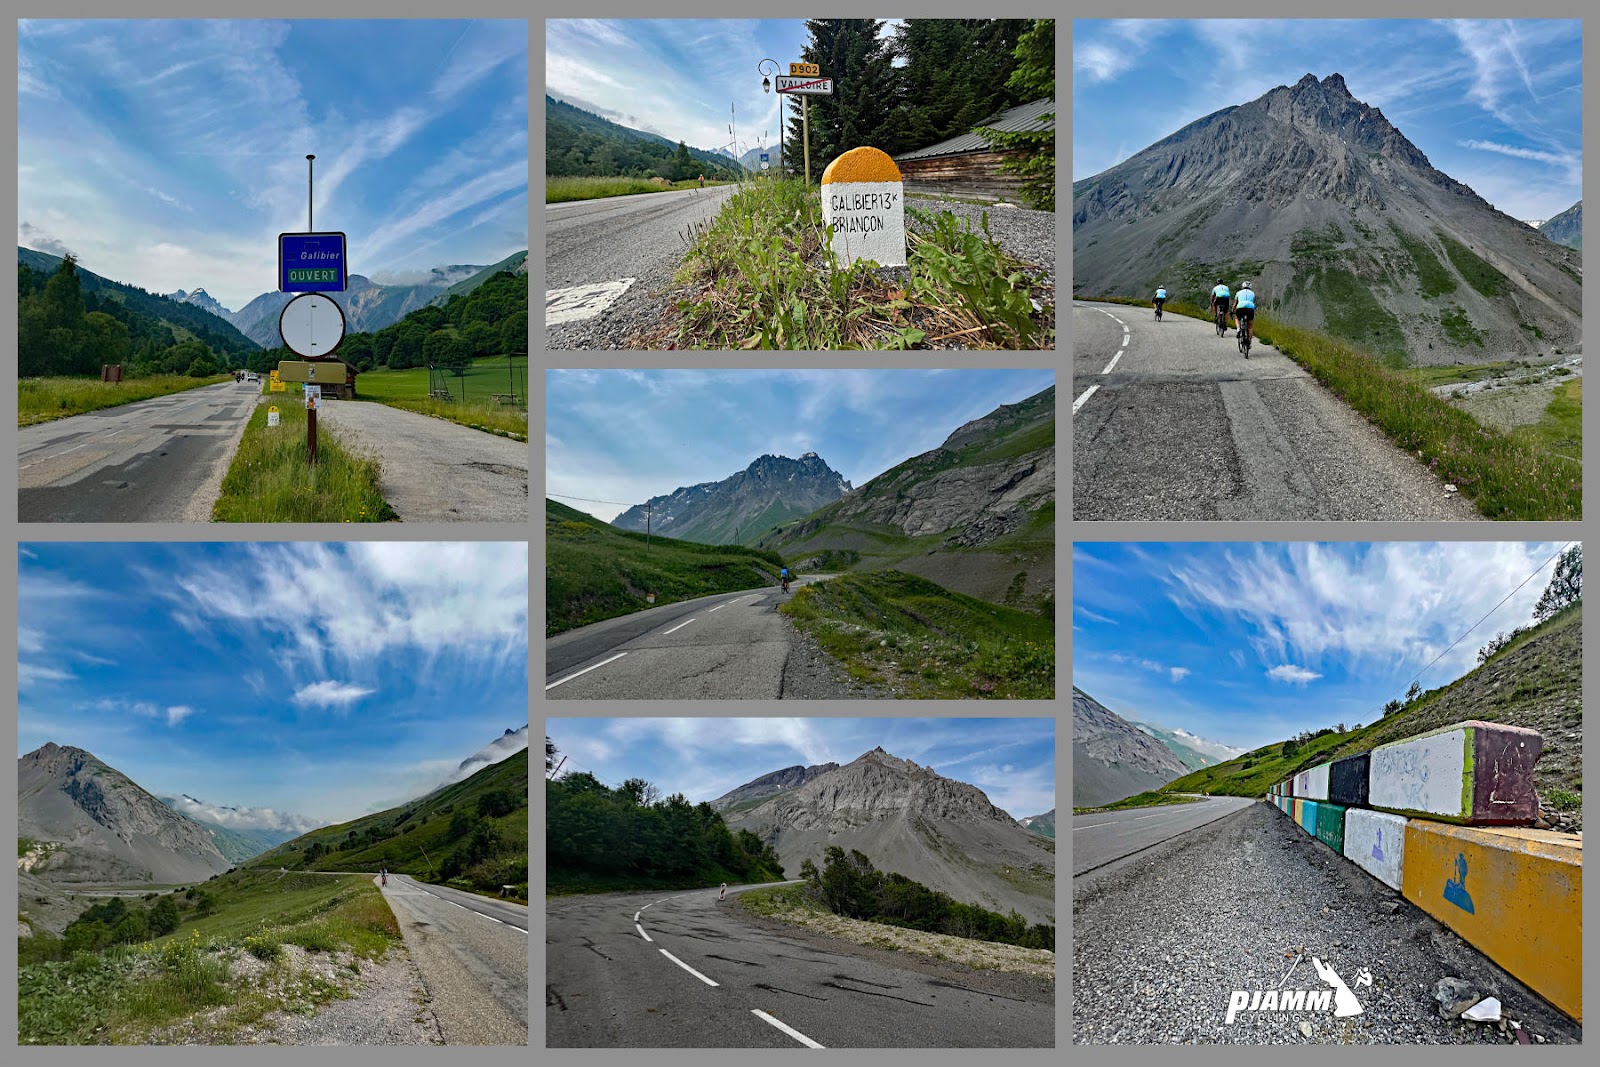 Cycling Col du Galibier from Valloire: photos along the first third of the climb include mountain views, road conditions, and yellow and white kilometer markers